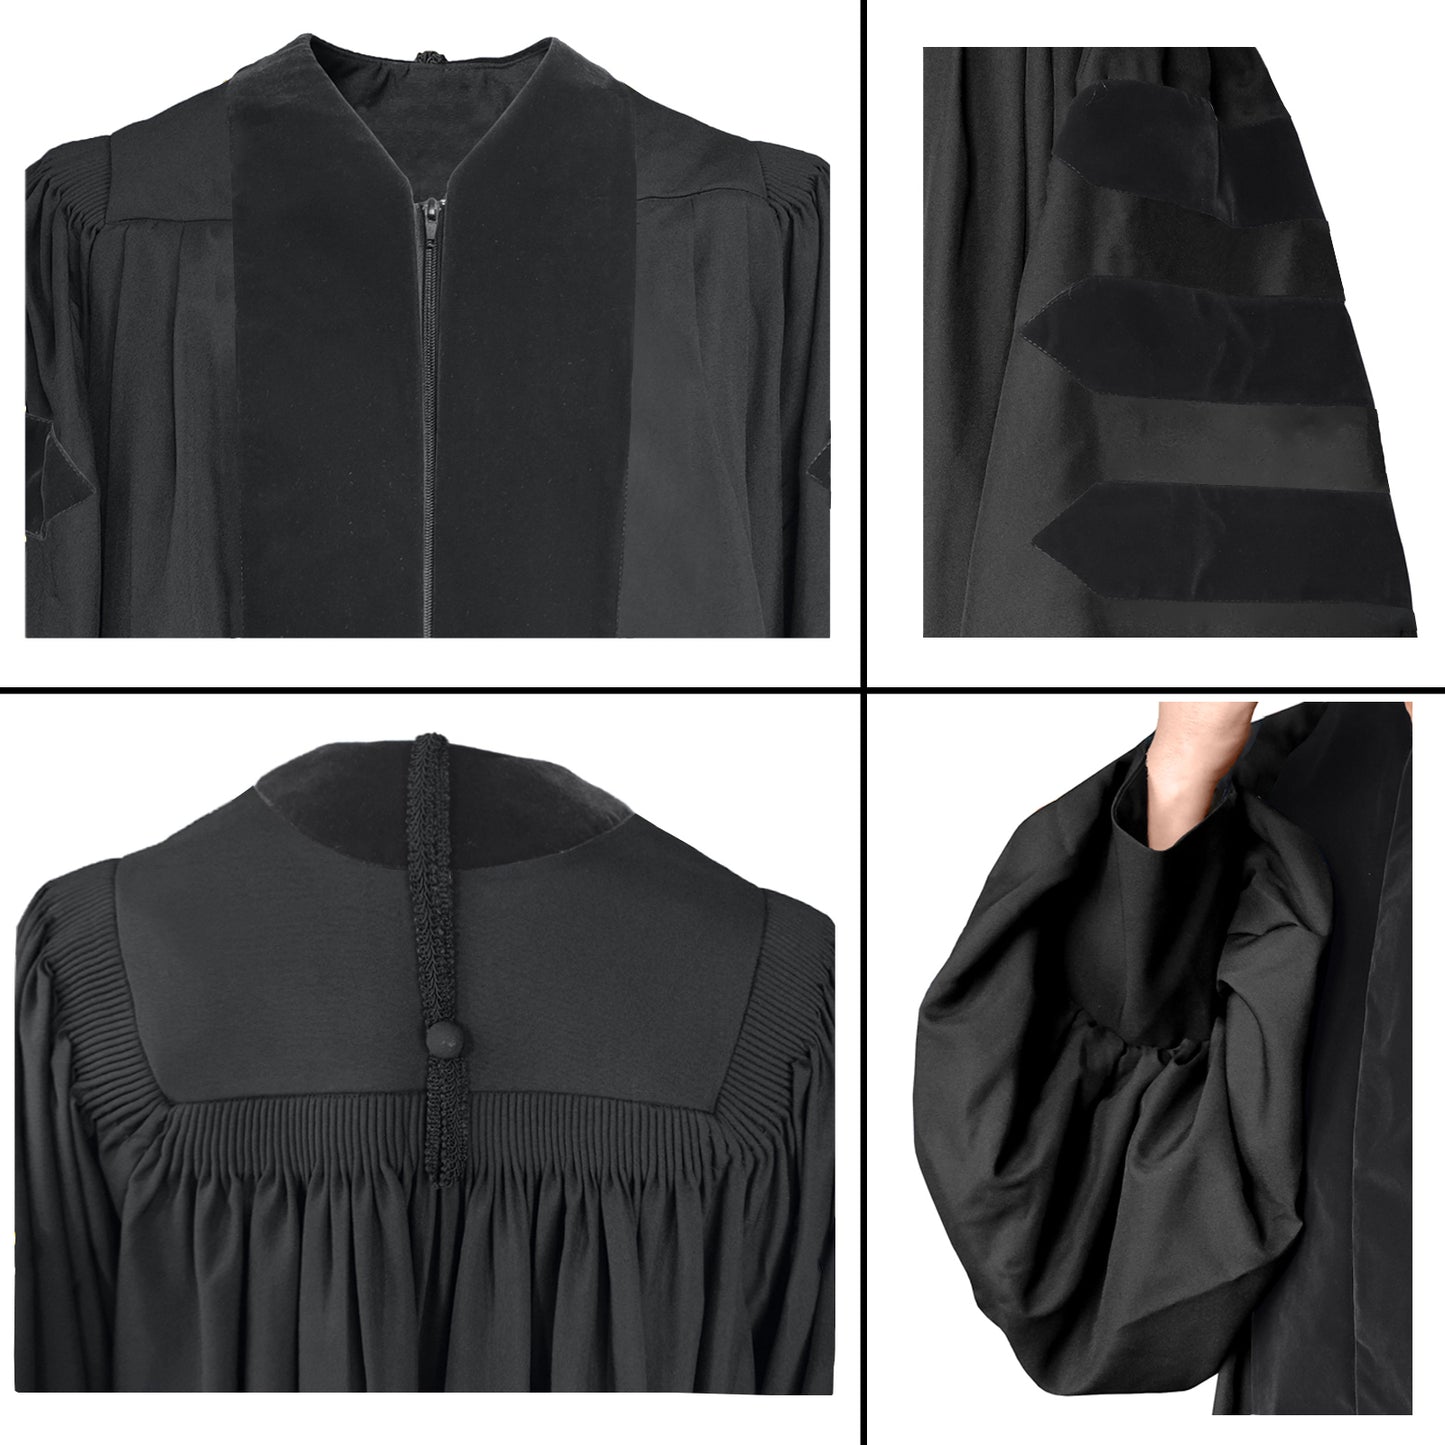 Deluxe Doctoral/PHD Graduation Gown NO piping-CA graduation